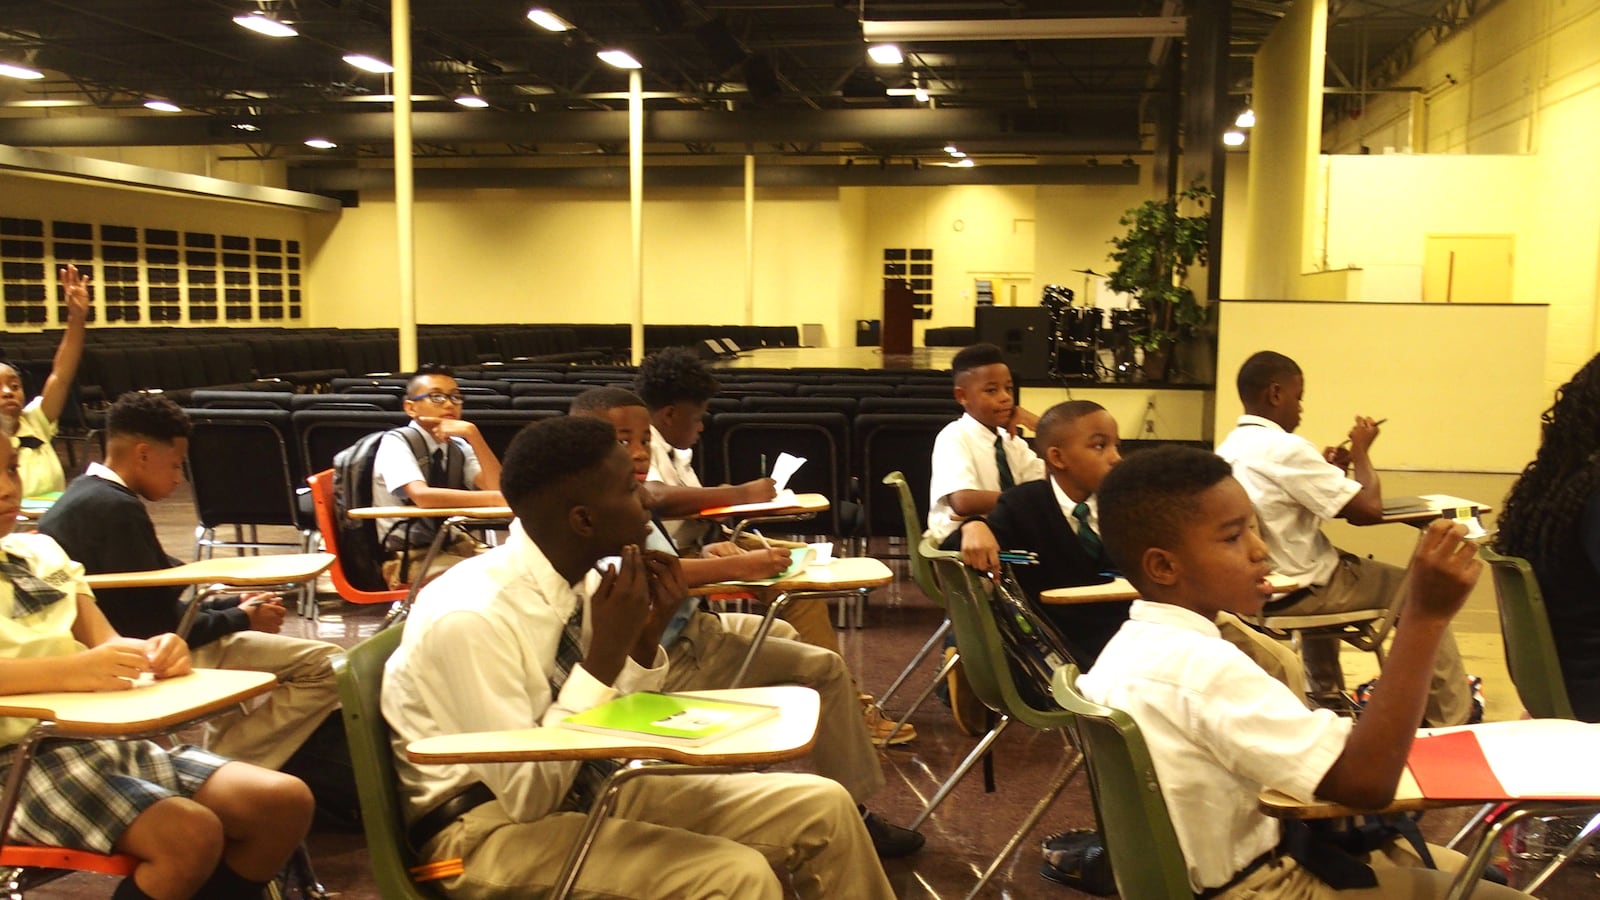 Memphis Business Academy is using makeshift classrooms in the auditorium to keep up with student enrollment, which is at about 1,000 students at the charter school's Frayser campus.